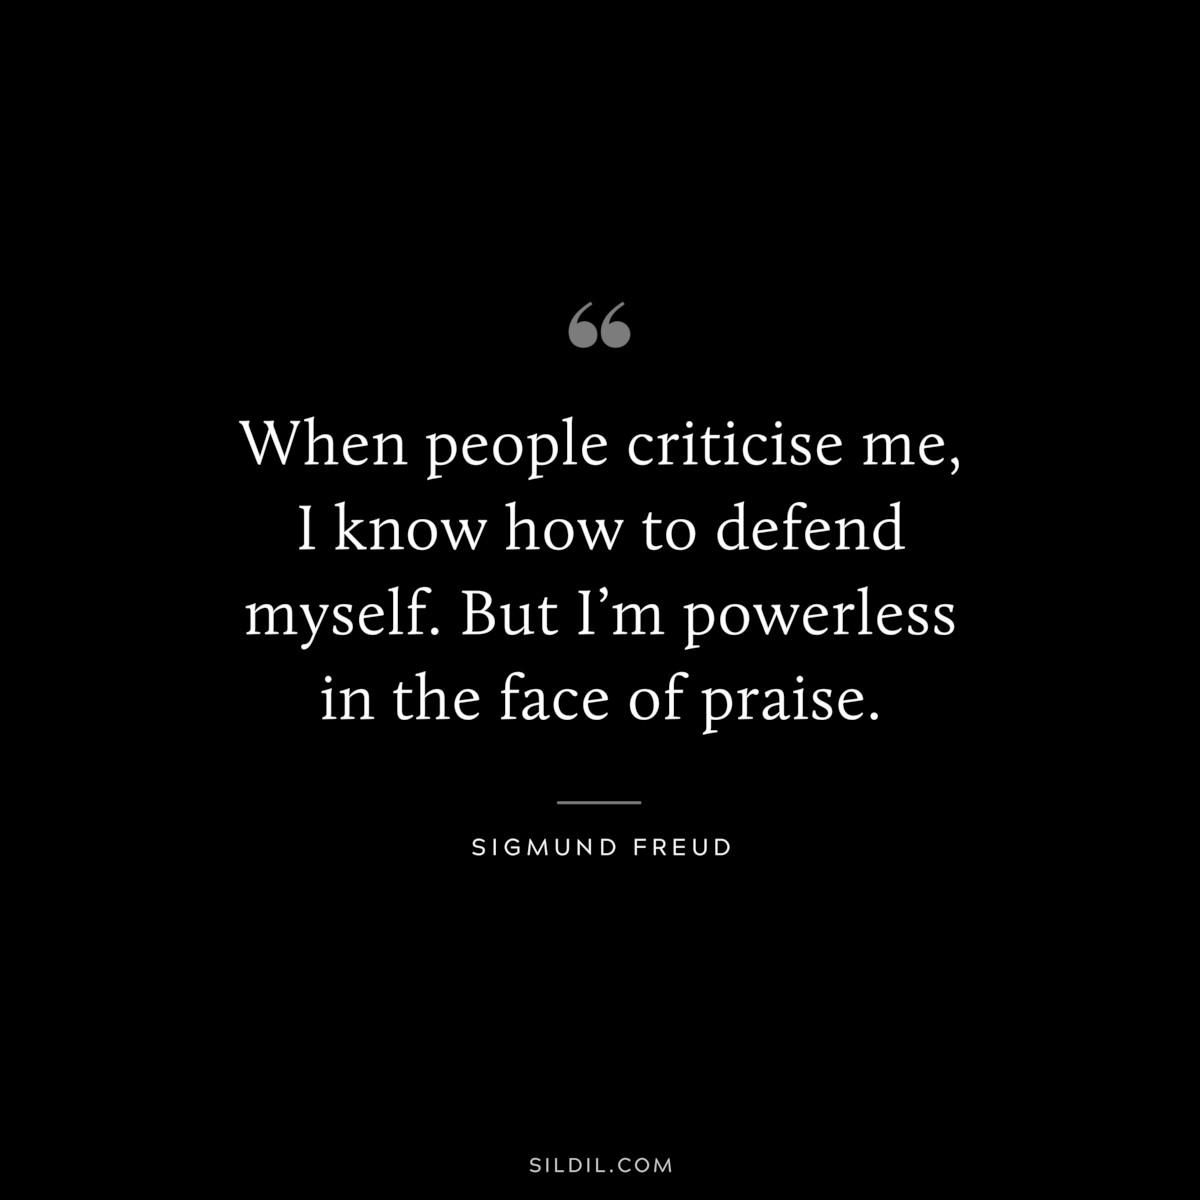 When people criticise me, I know how to defend myself. But I’m powerless in the face of praise. ― Sigmund Frued